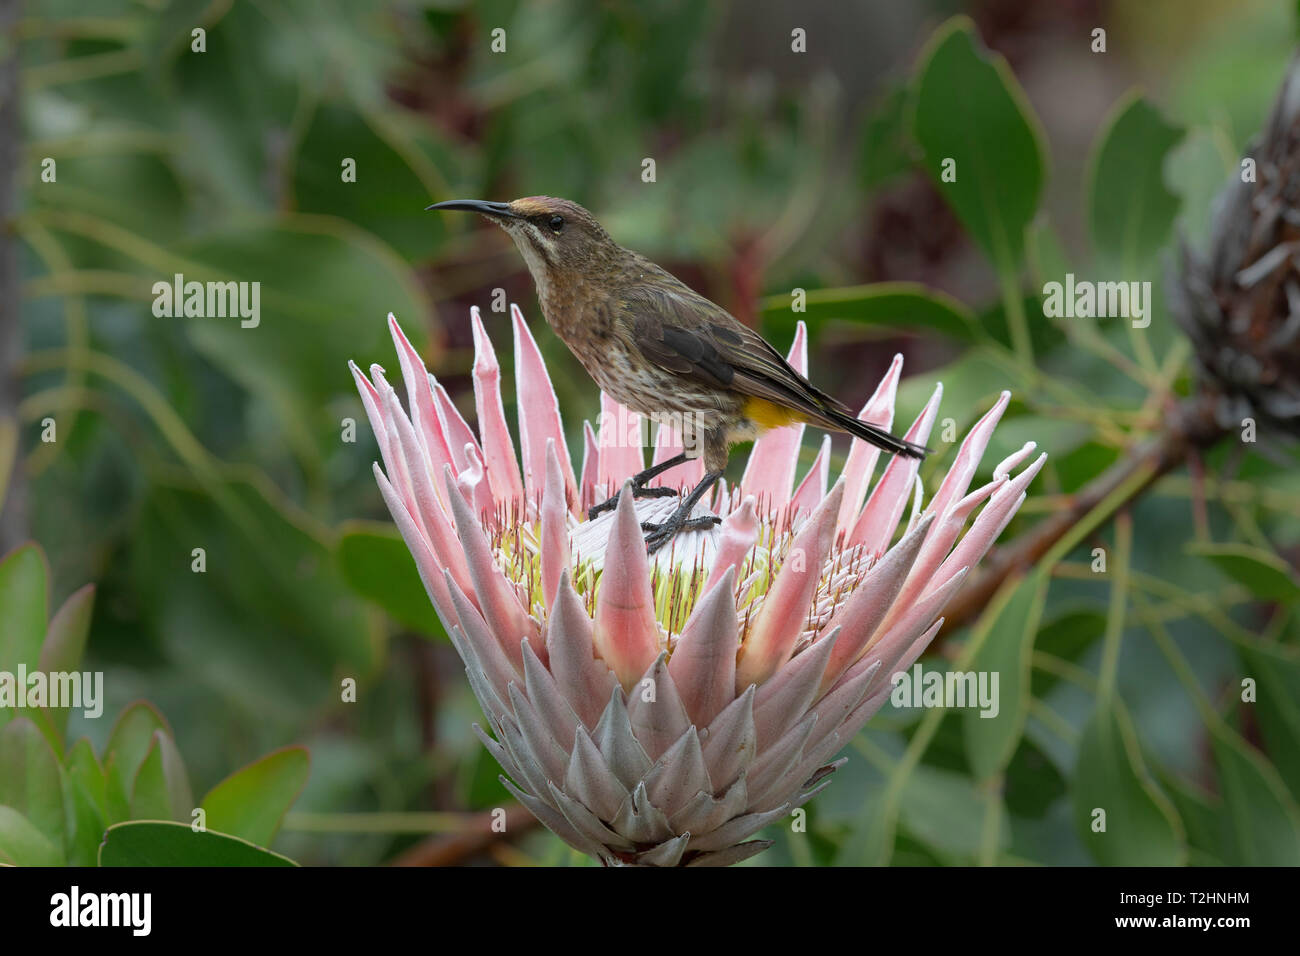 Cape sugarbird, Promerops cafer, on king protea, Kirstenbosch National Botanical Garden, Cape Town, South Africa Stock Photo